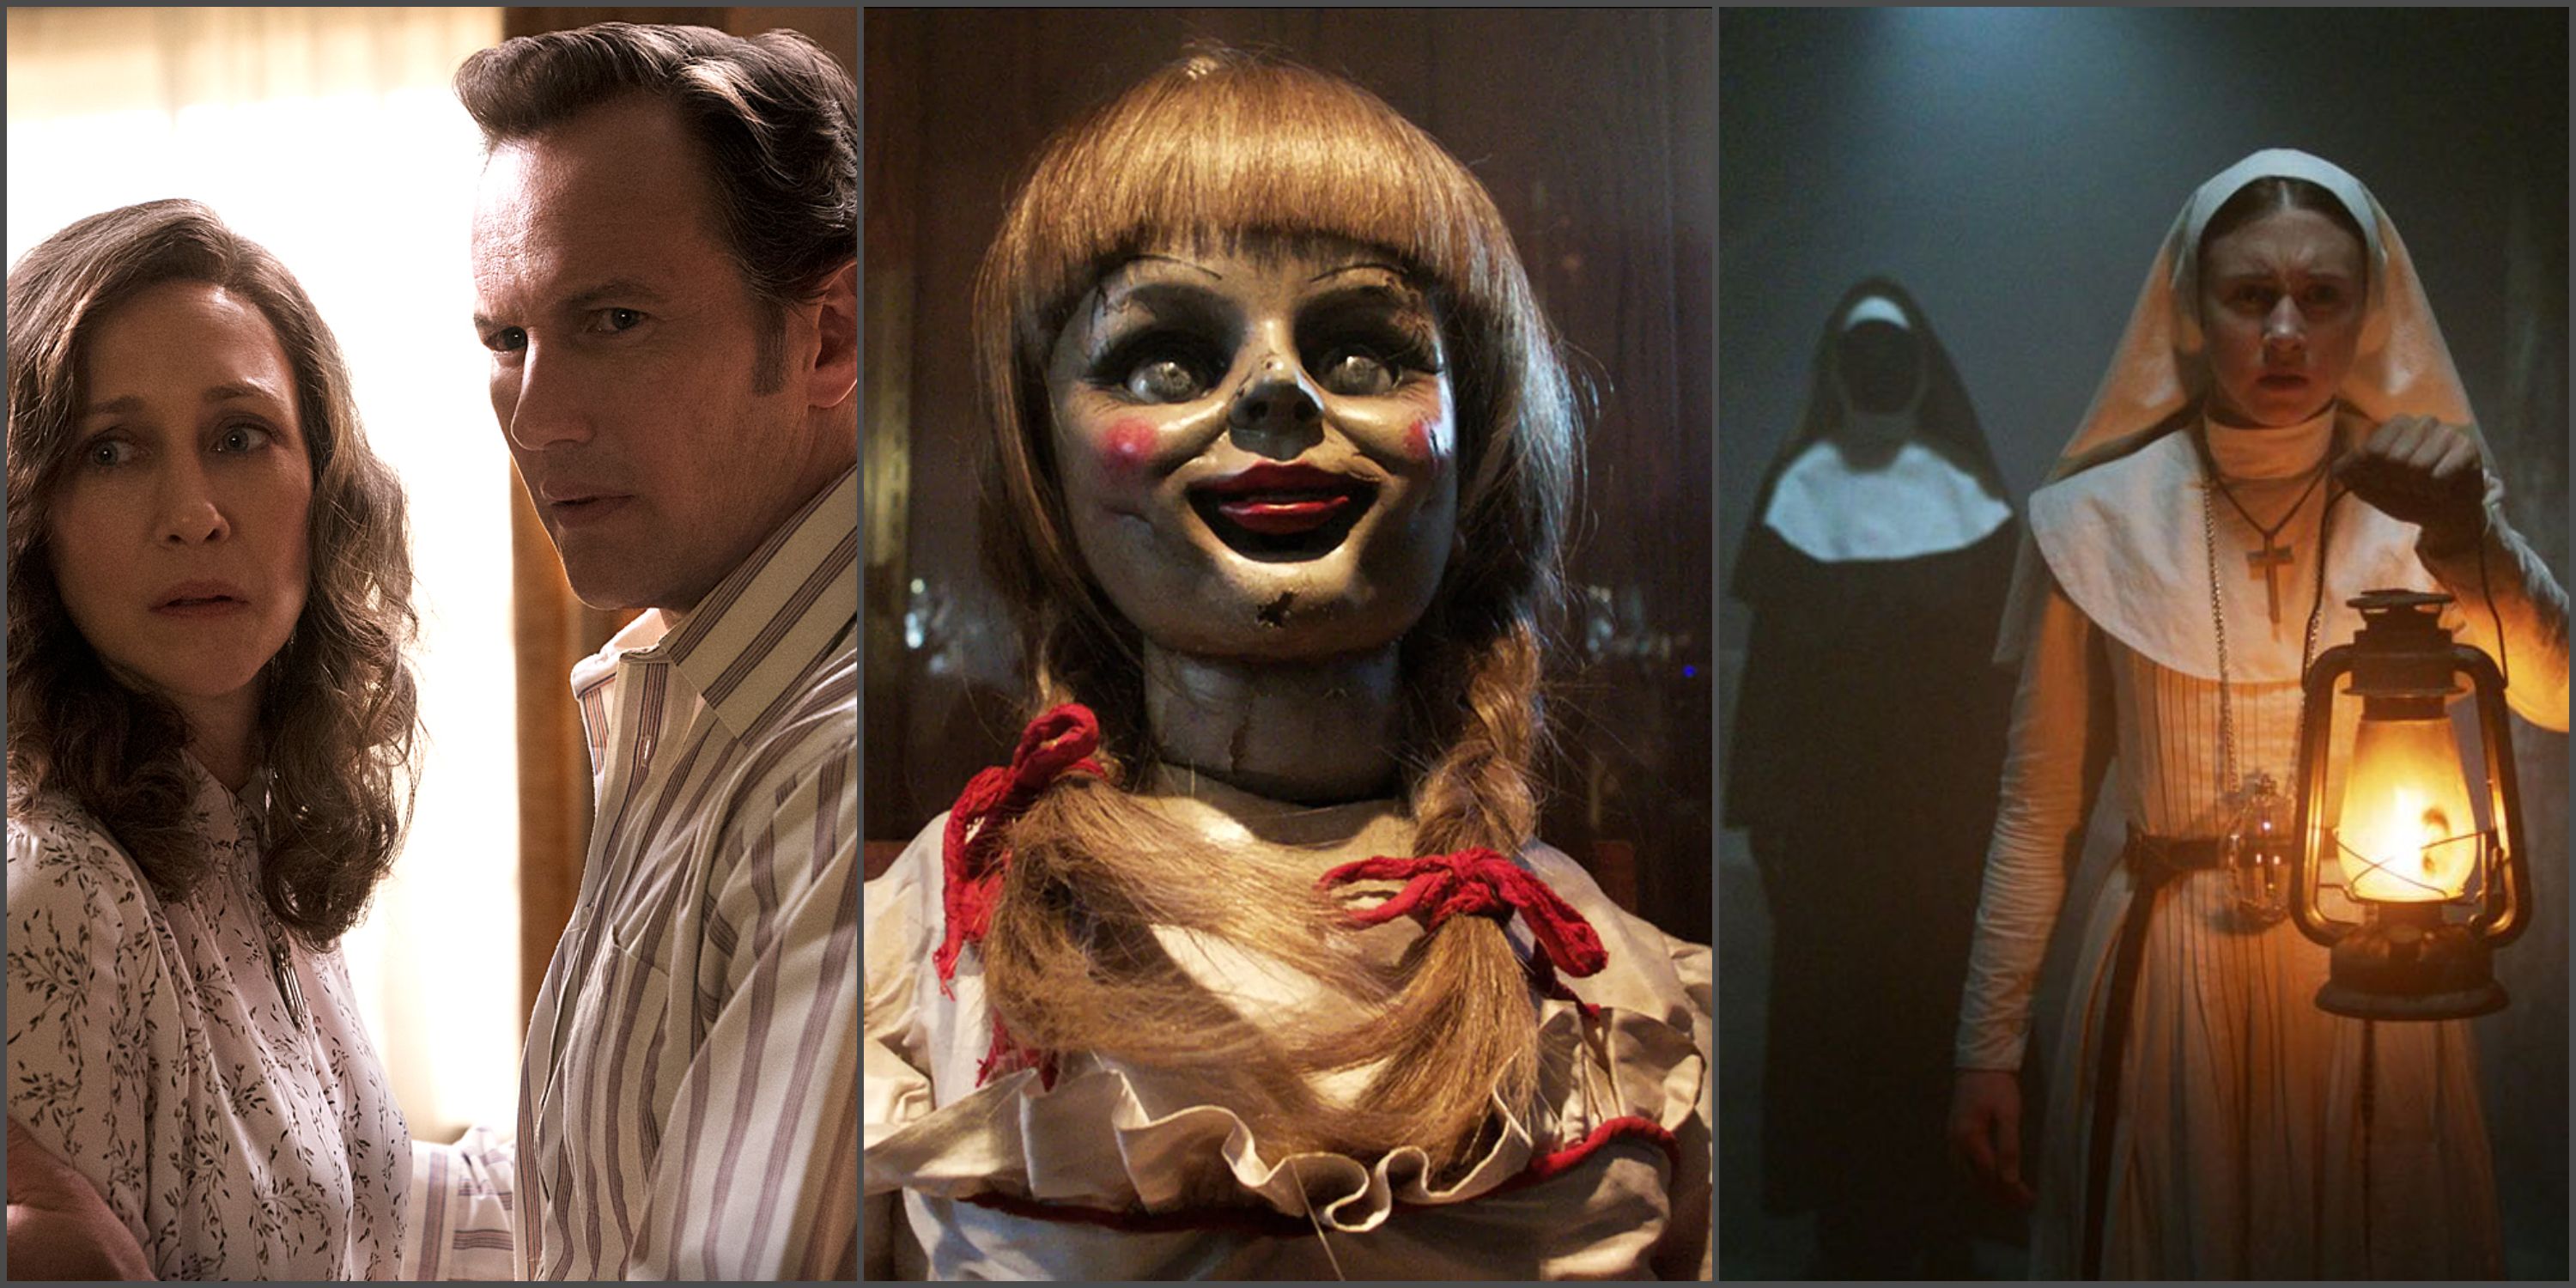 The Conjuring Universe: Ed and Lorraine Warren from The Conjuring, Annabelle, and Sister Irene from The Nun